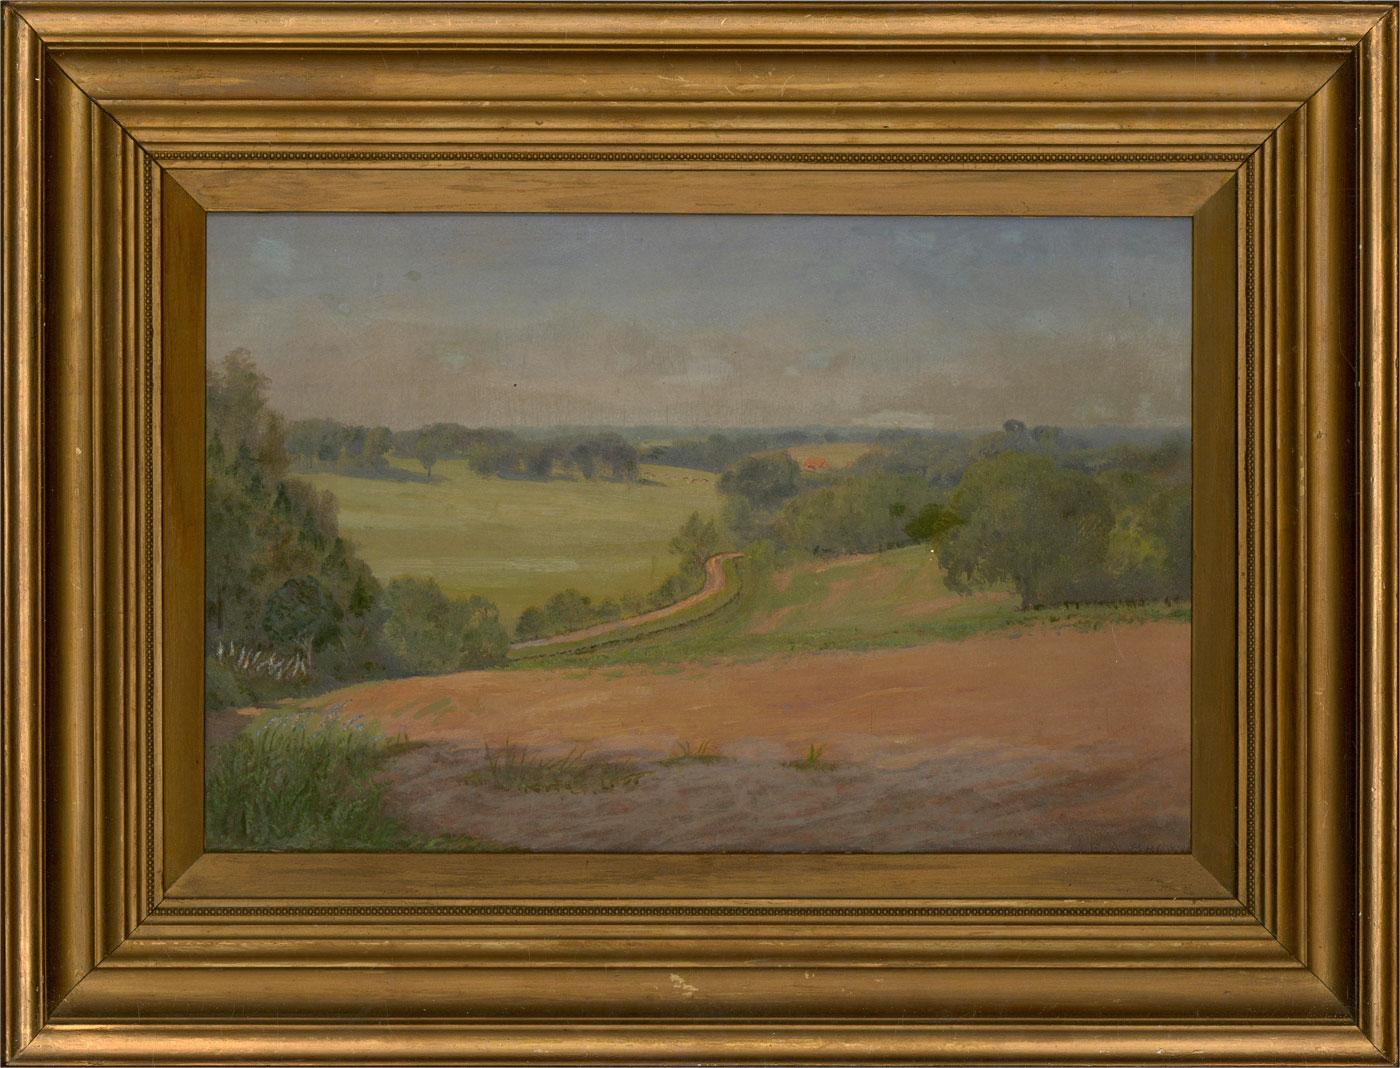 A view on a summer morning near Bengeo, Hertfordshire, of a country track winding through rolling hills. A herd of cattle can be seen grazing in a field in the distance. Presented in a gold-painted wooden frame. Signed to the lower-right edge.